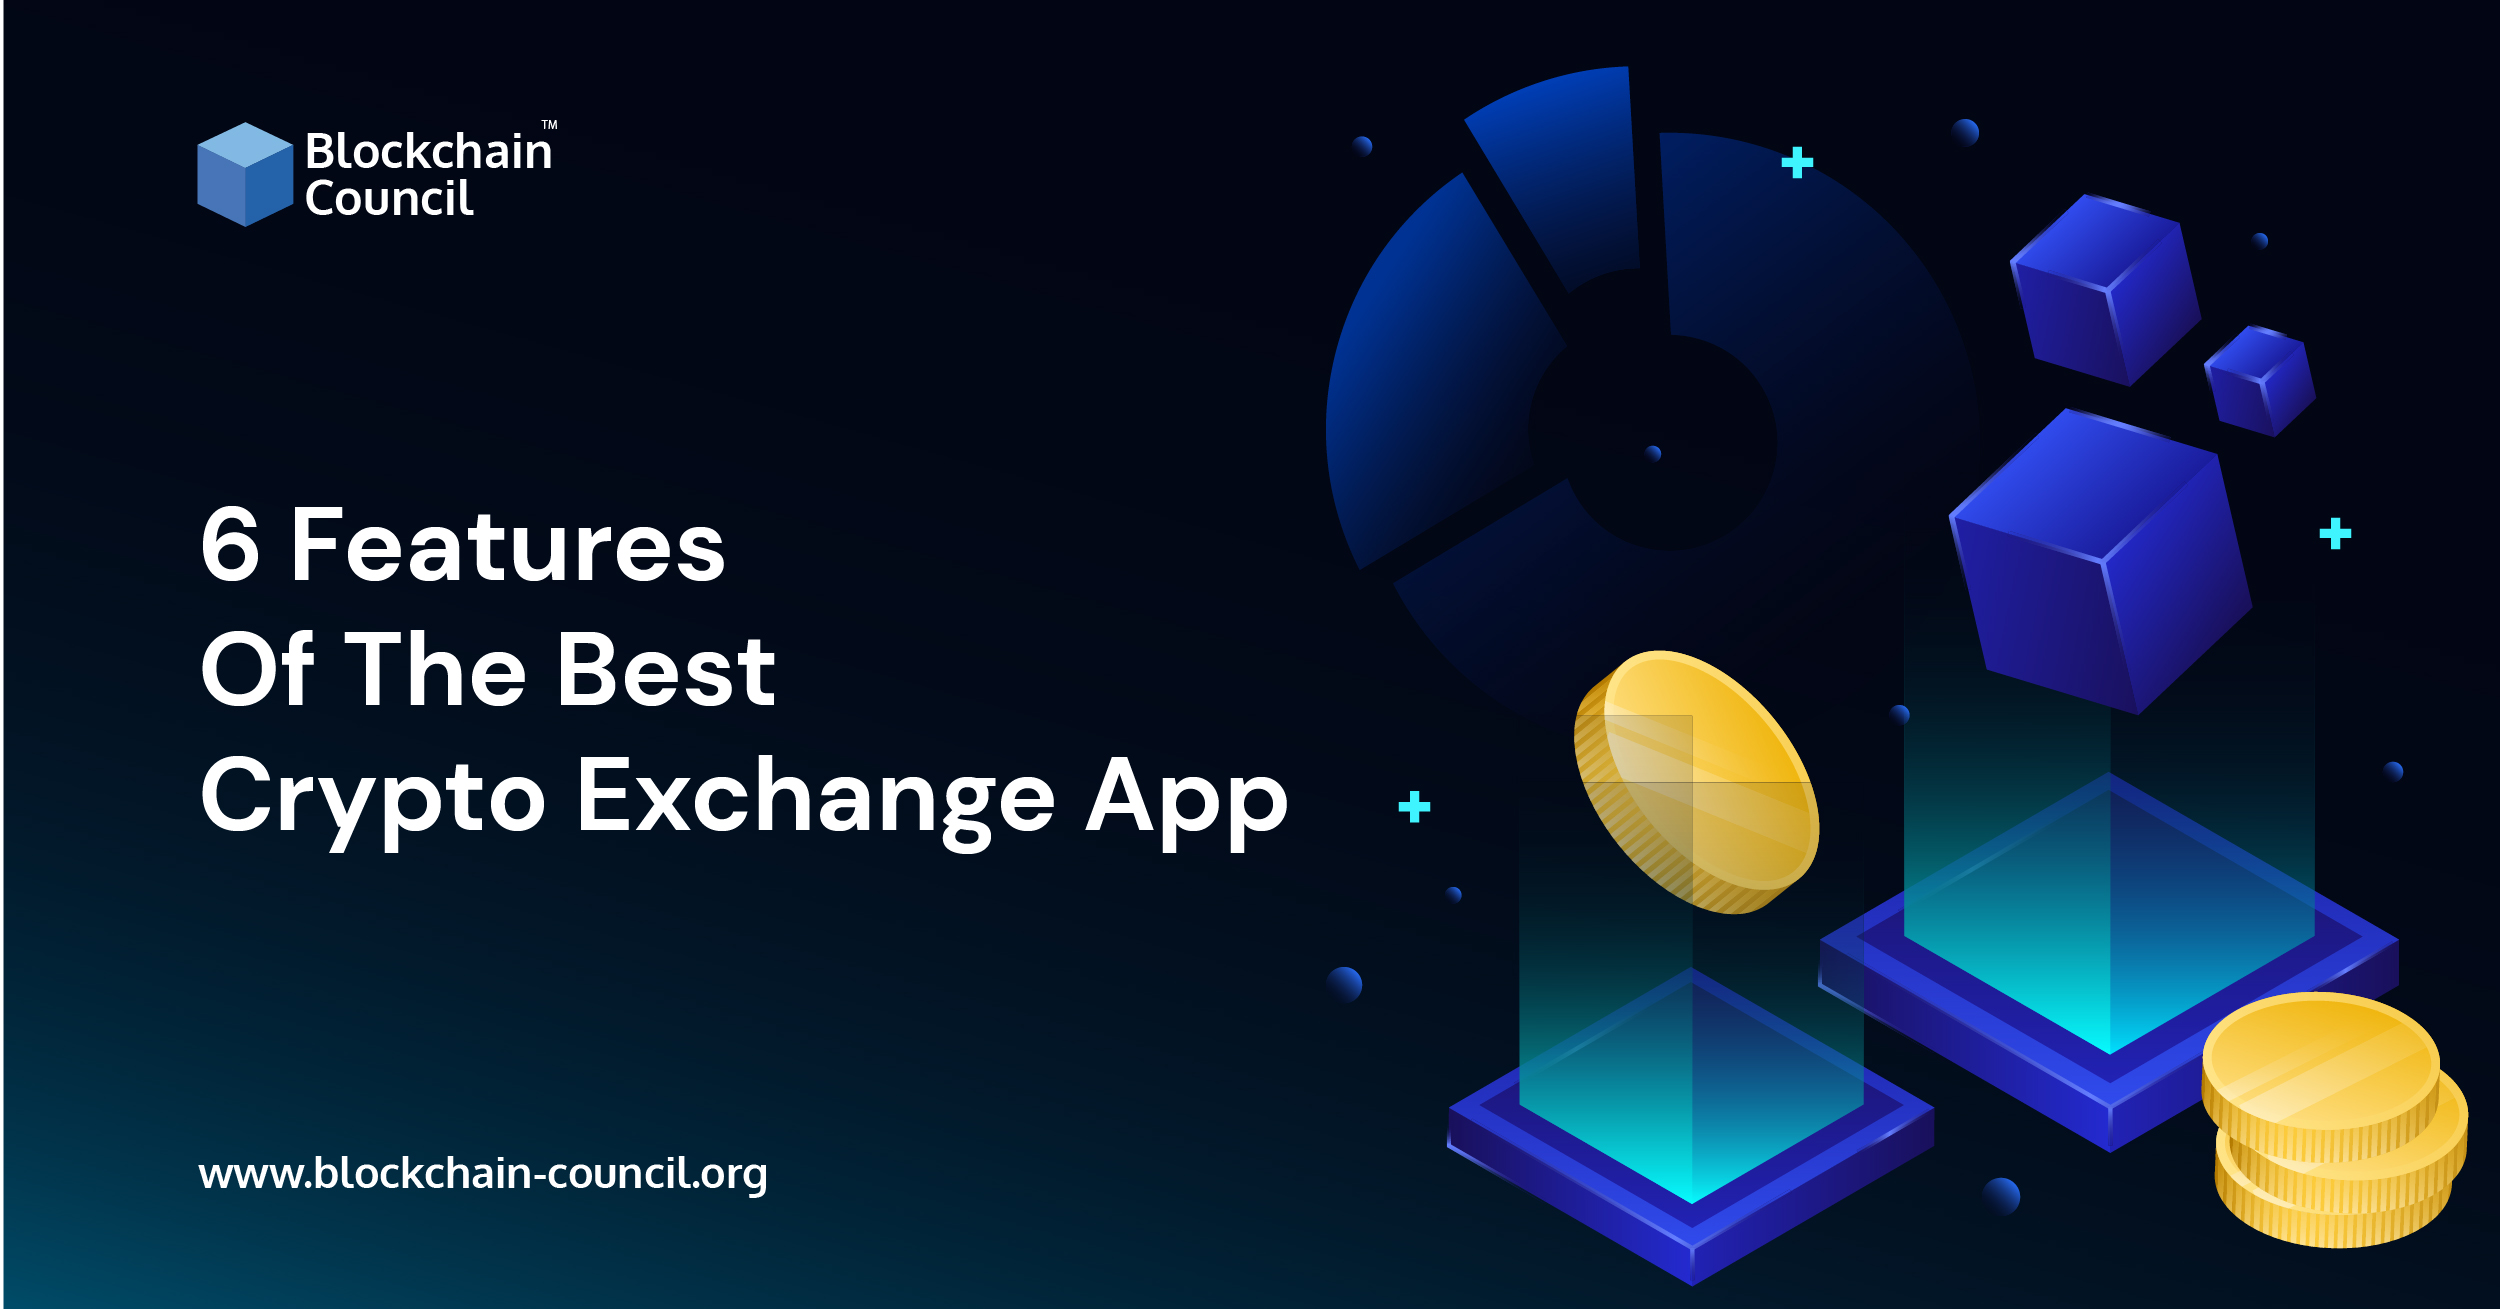 6 Features Of The Best Crypto Exchange App